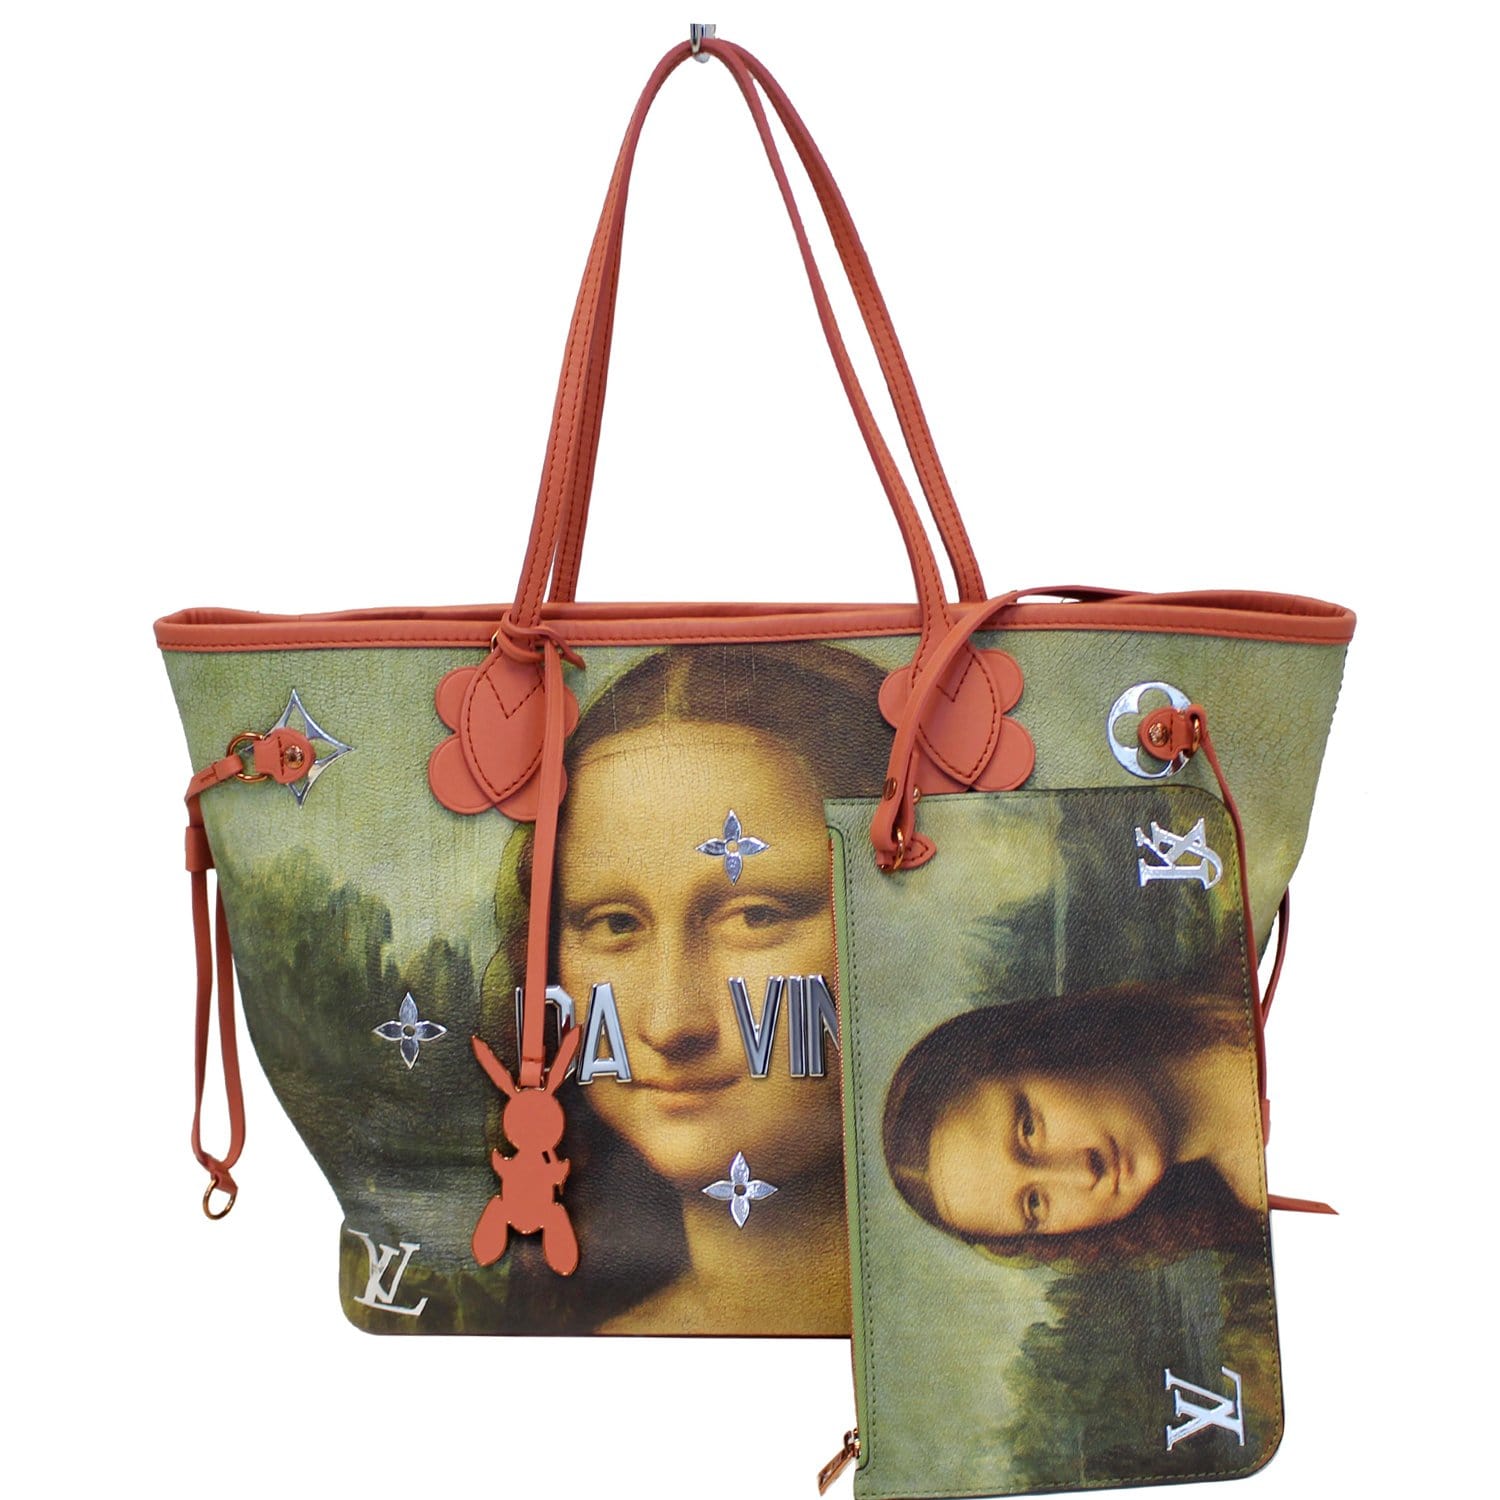 Louis Vuitton Masters: Jeff Koons is the first ever to rework the